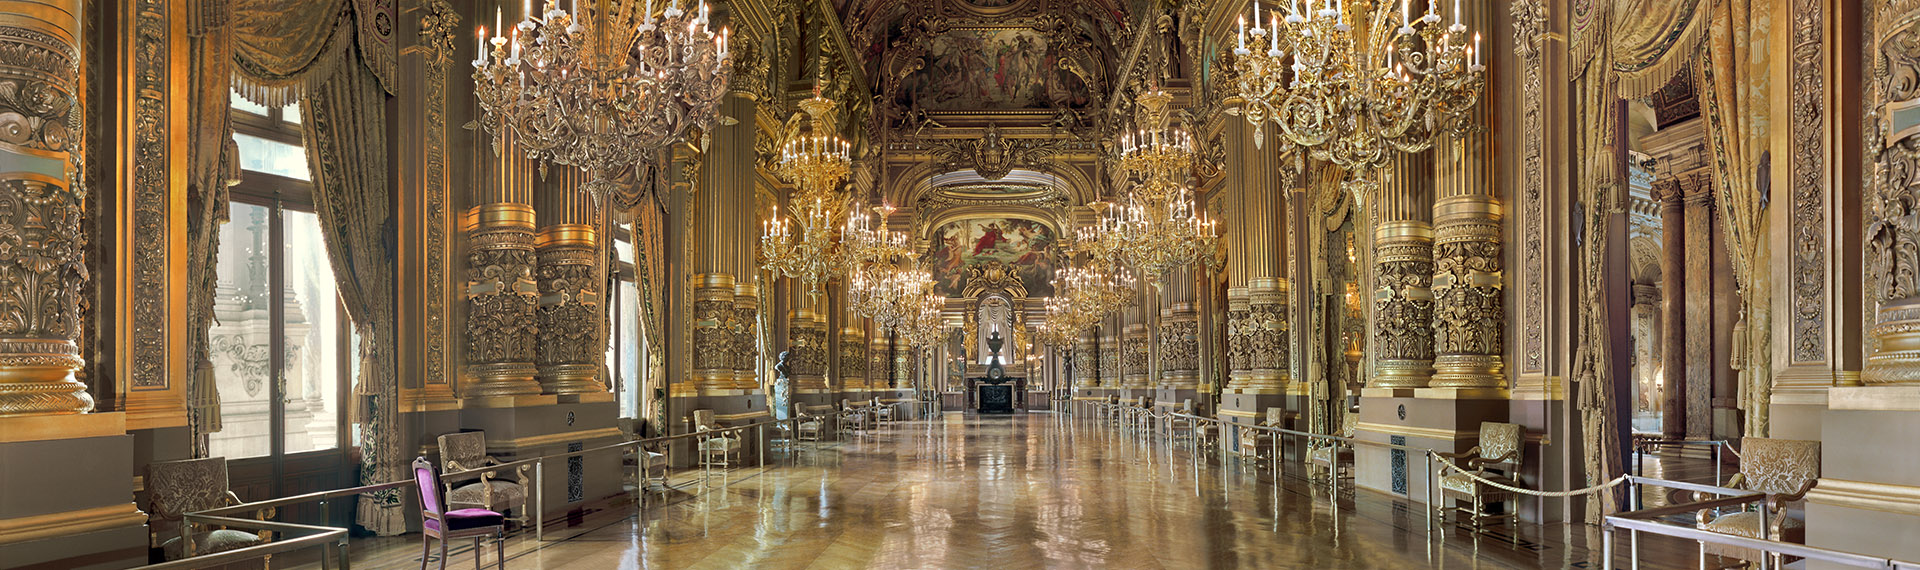 A panorama of the Grand Foyer inside the Opéra Garnier in Paris.